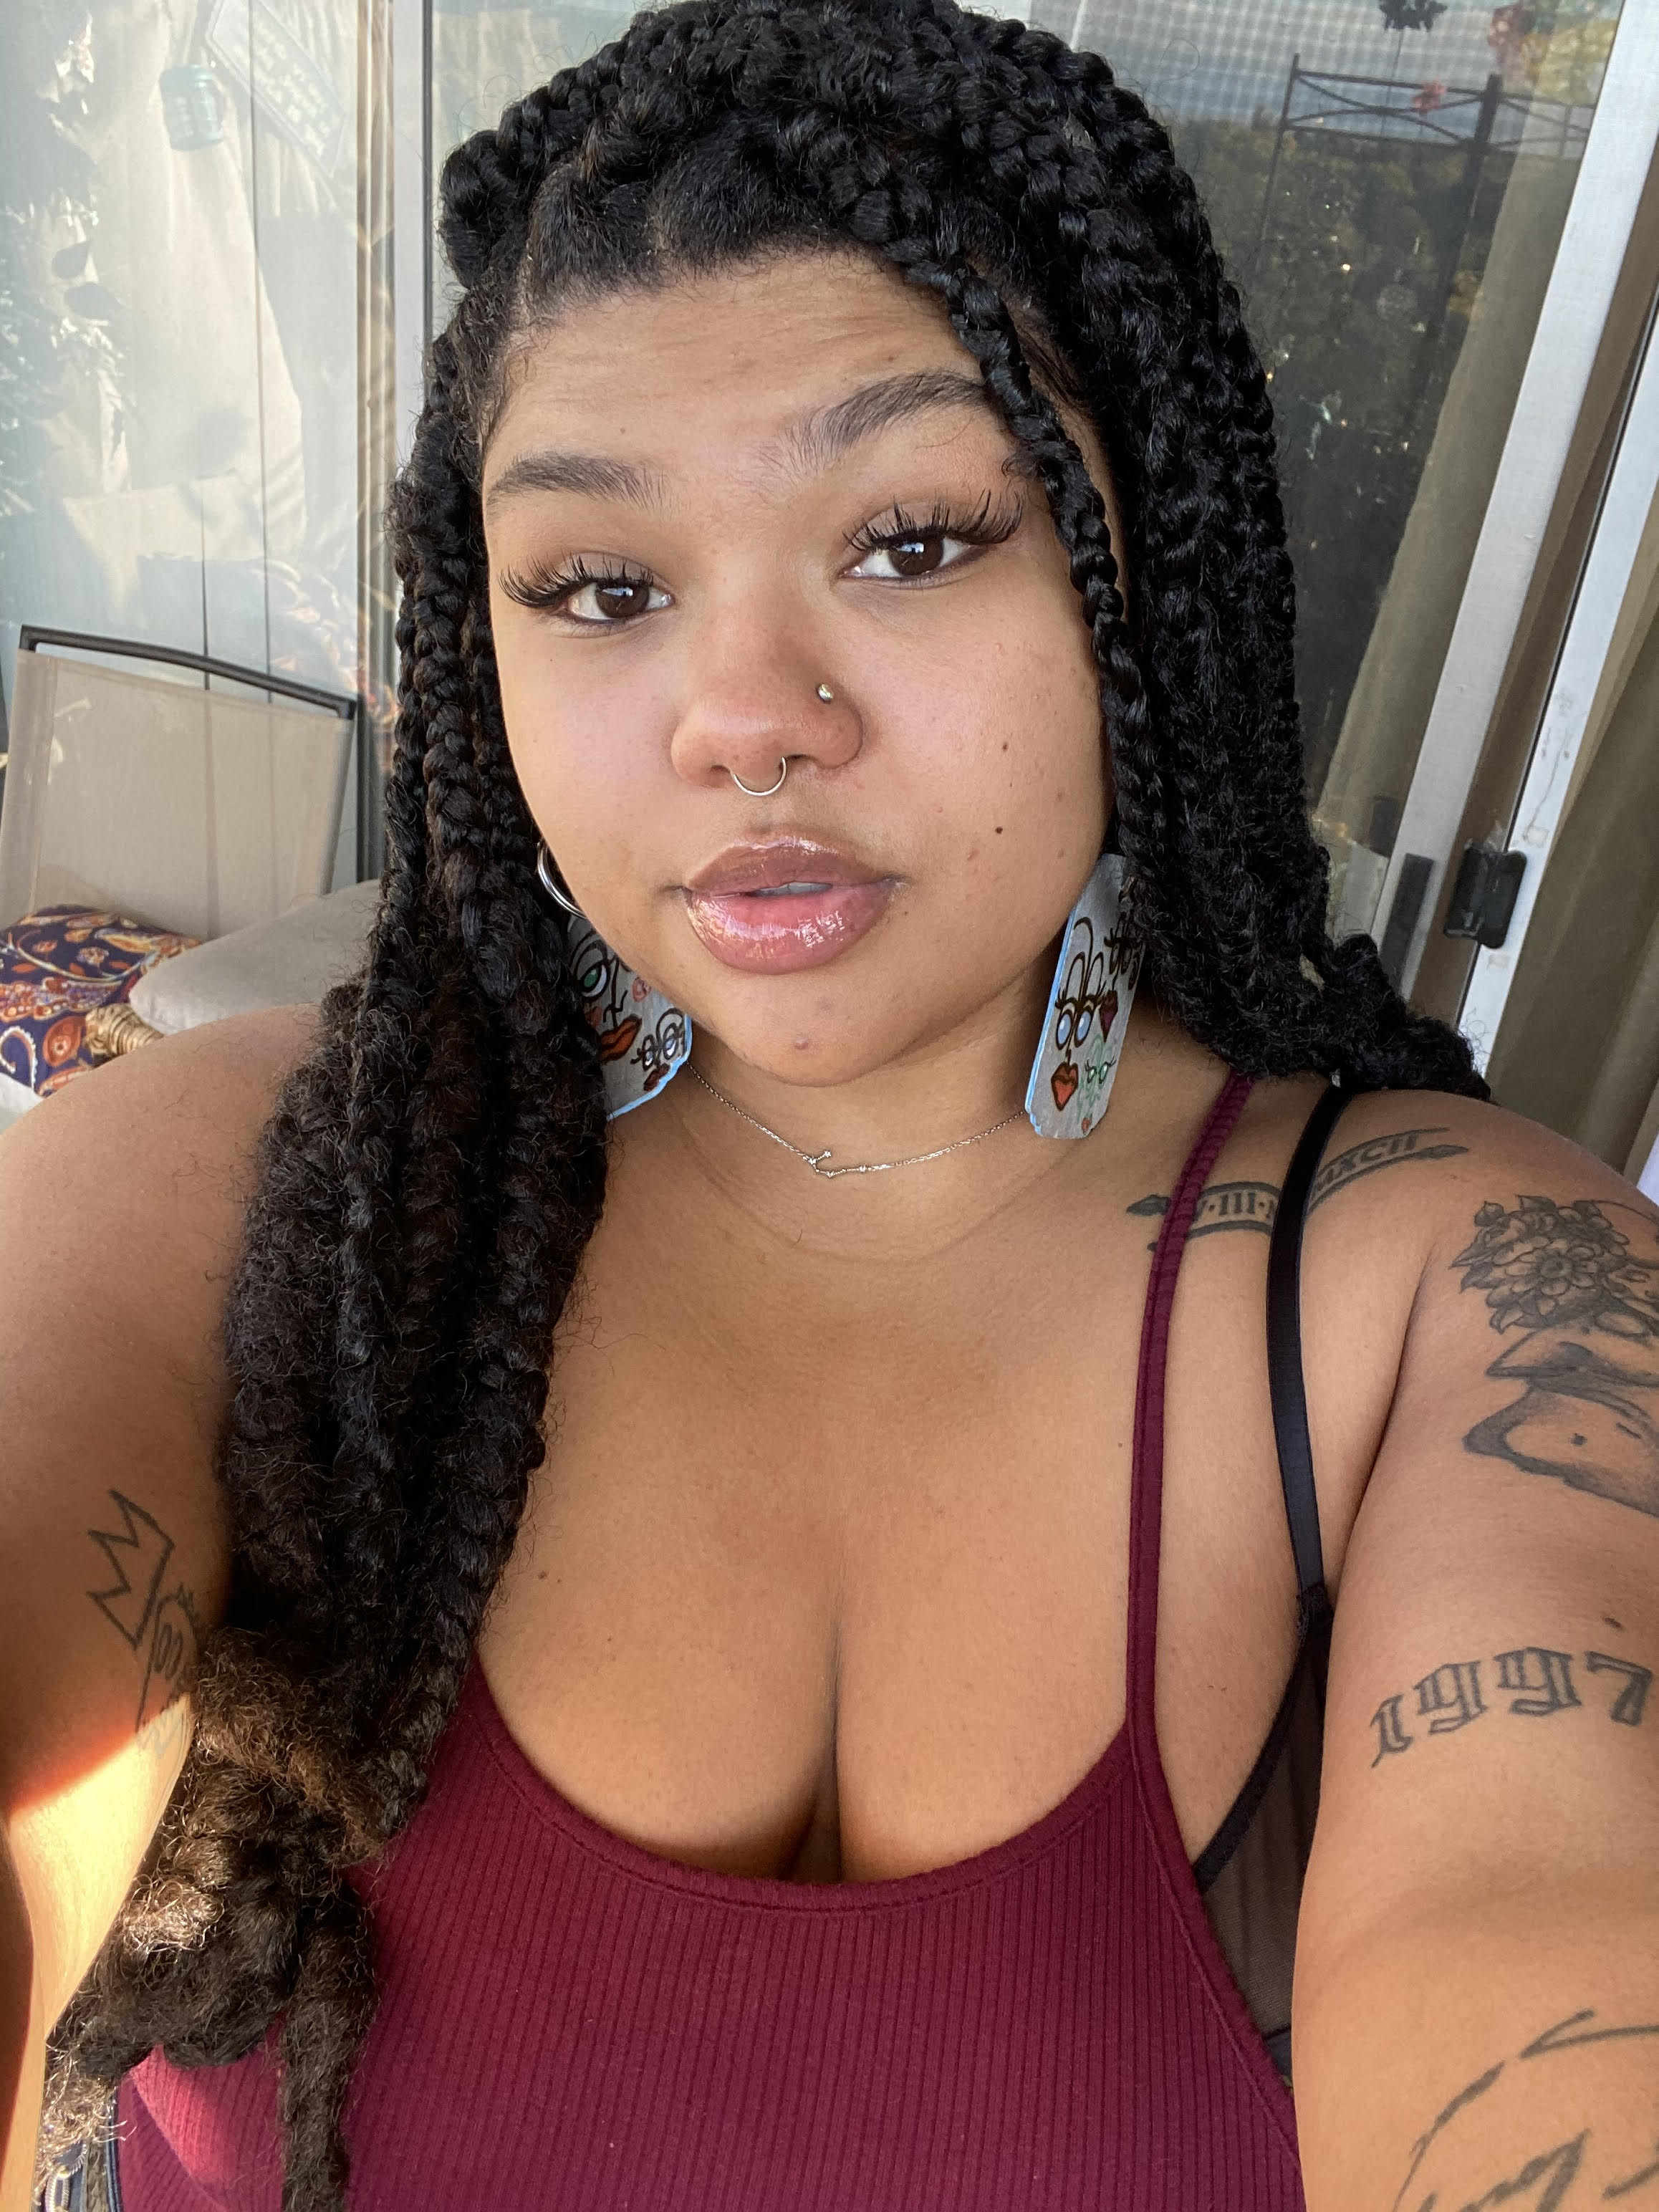 A selfie of Christina, wearing a burgundy tank top, which reveals the tattoos on her arms. Her lips are pierced, her hair is braided, and she has large earrings on that have faces on them. 